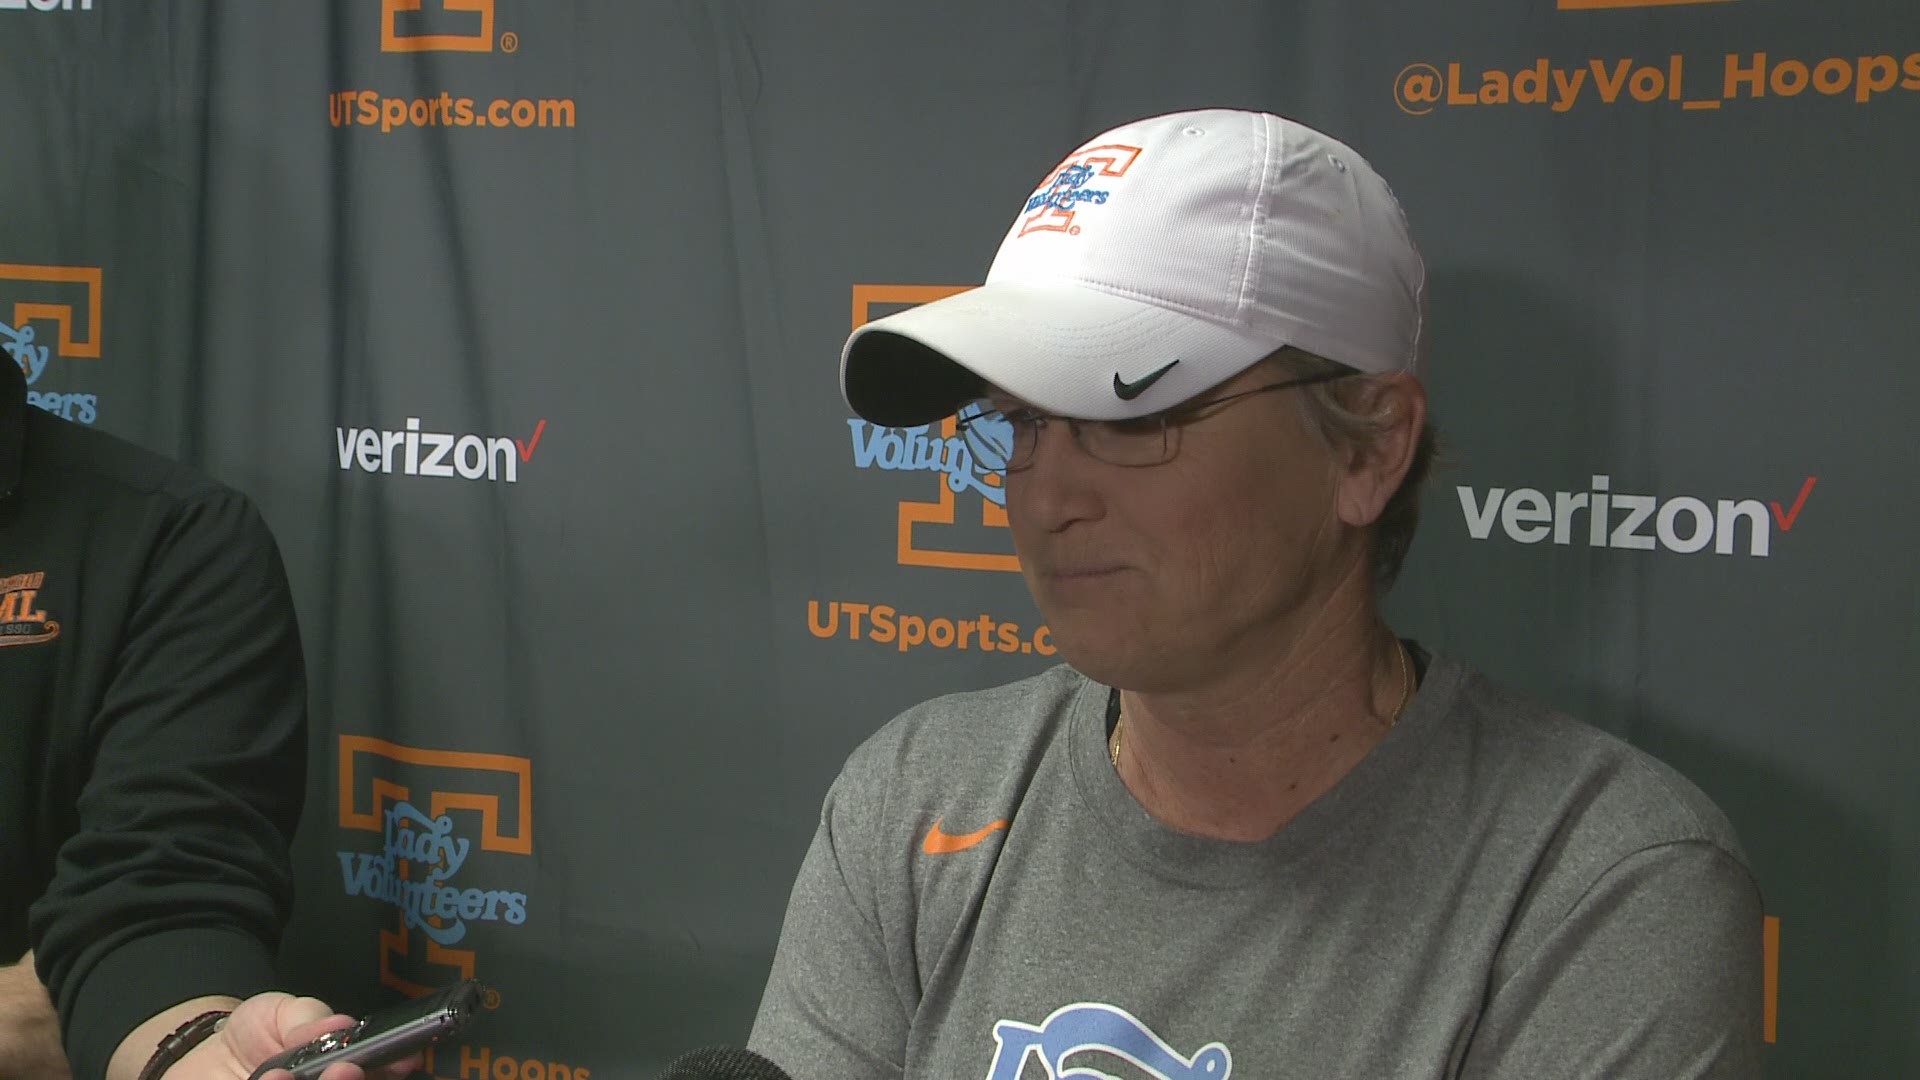 Lady Vols coach Holly Warlick talks to reporters in advance of Tennessee's game at Auburn.